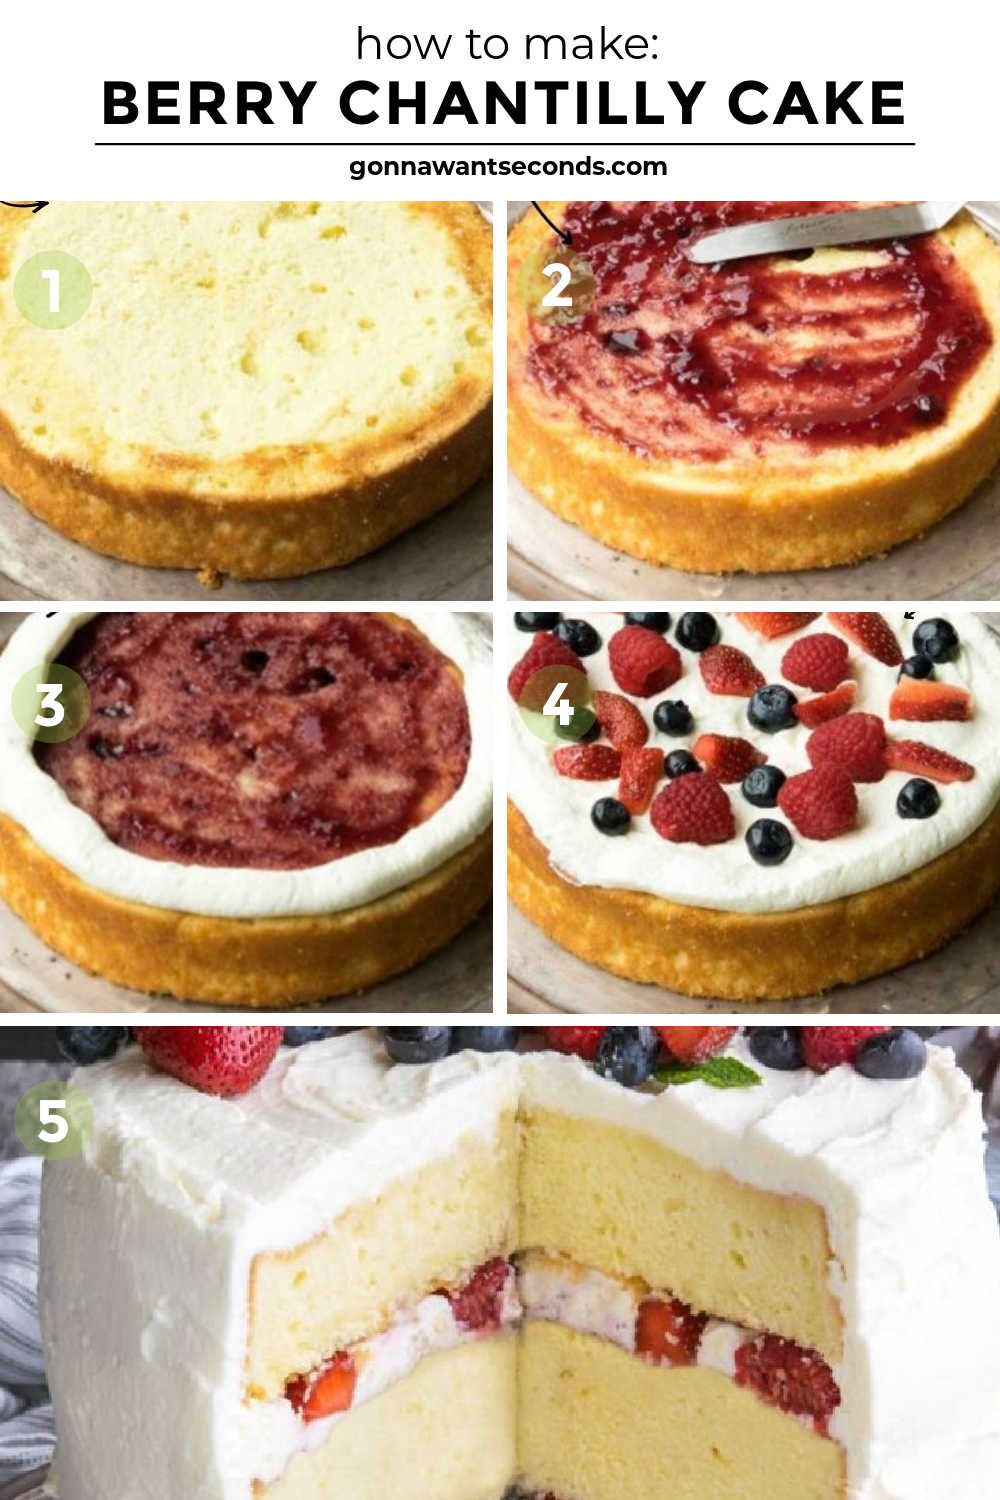 Step by step how to make berry chantilly cake